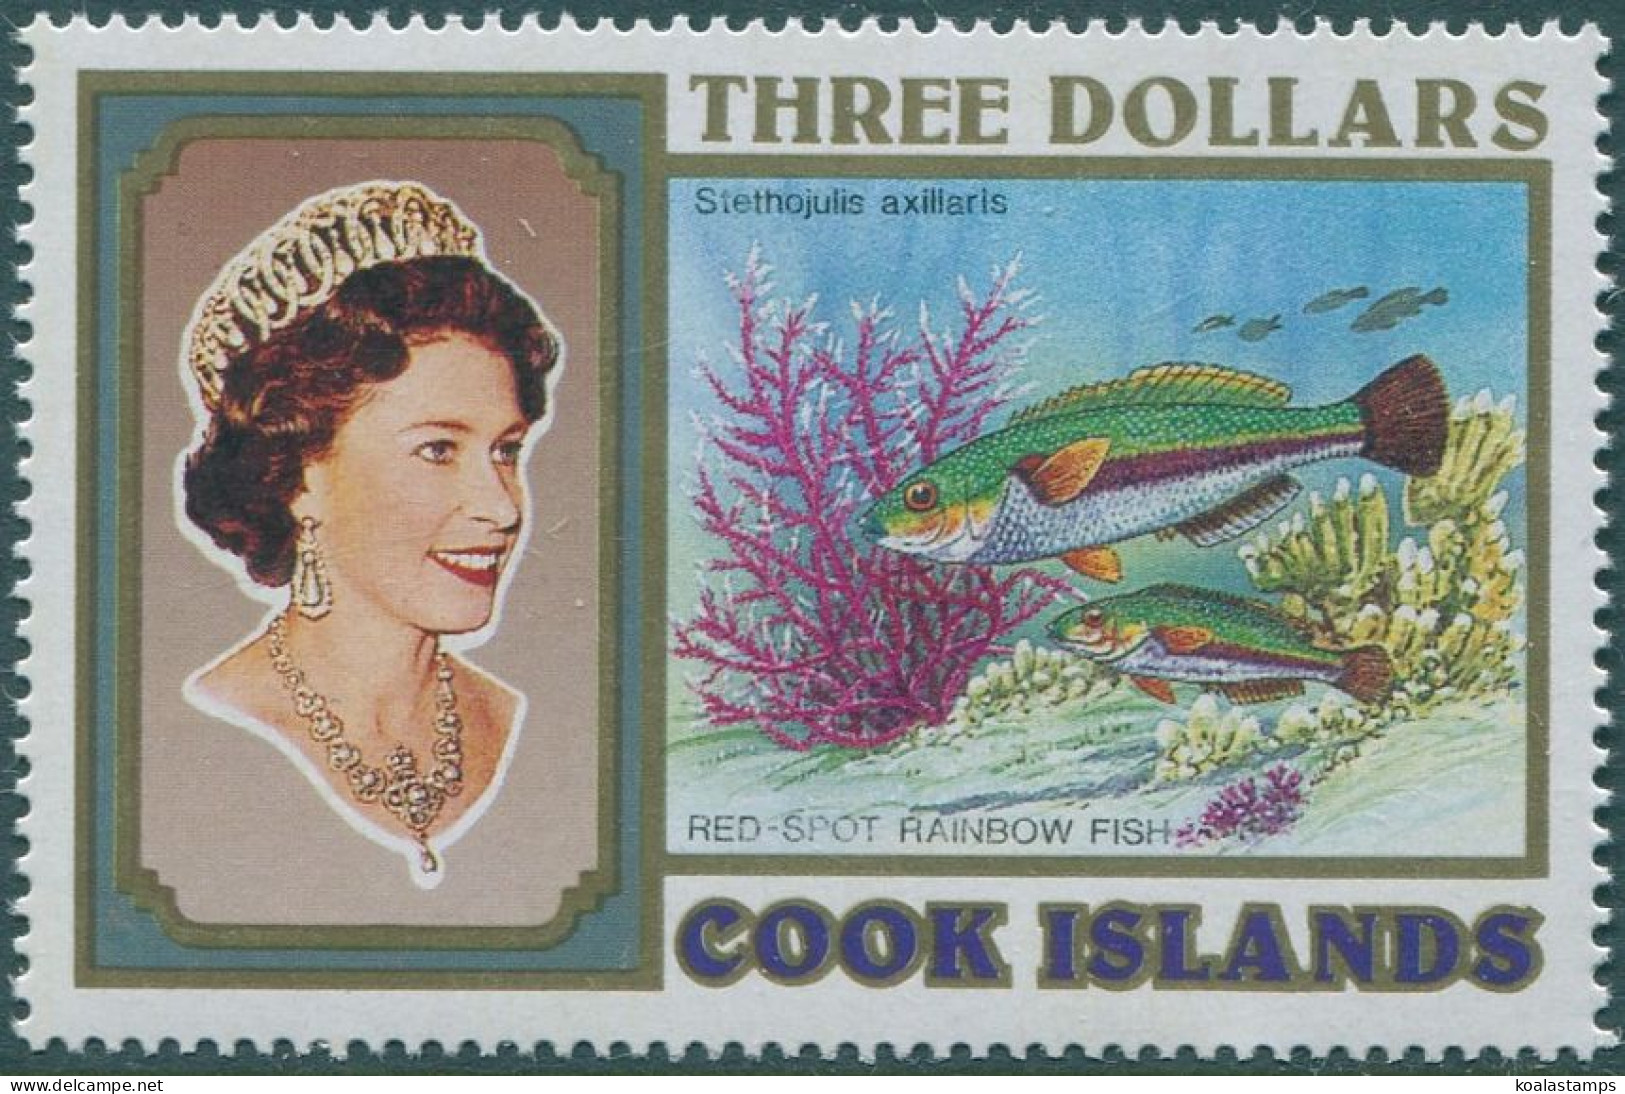 Cook Islands 1992 SG1273 $3 Red-spotted Rainbowfish MNH - Cook Islands